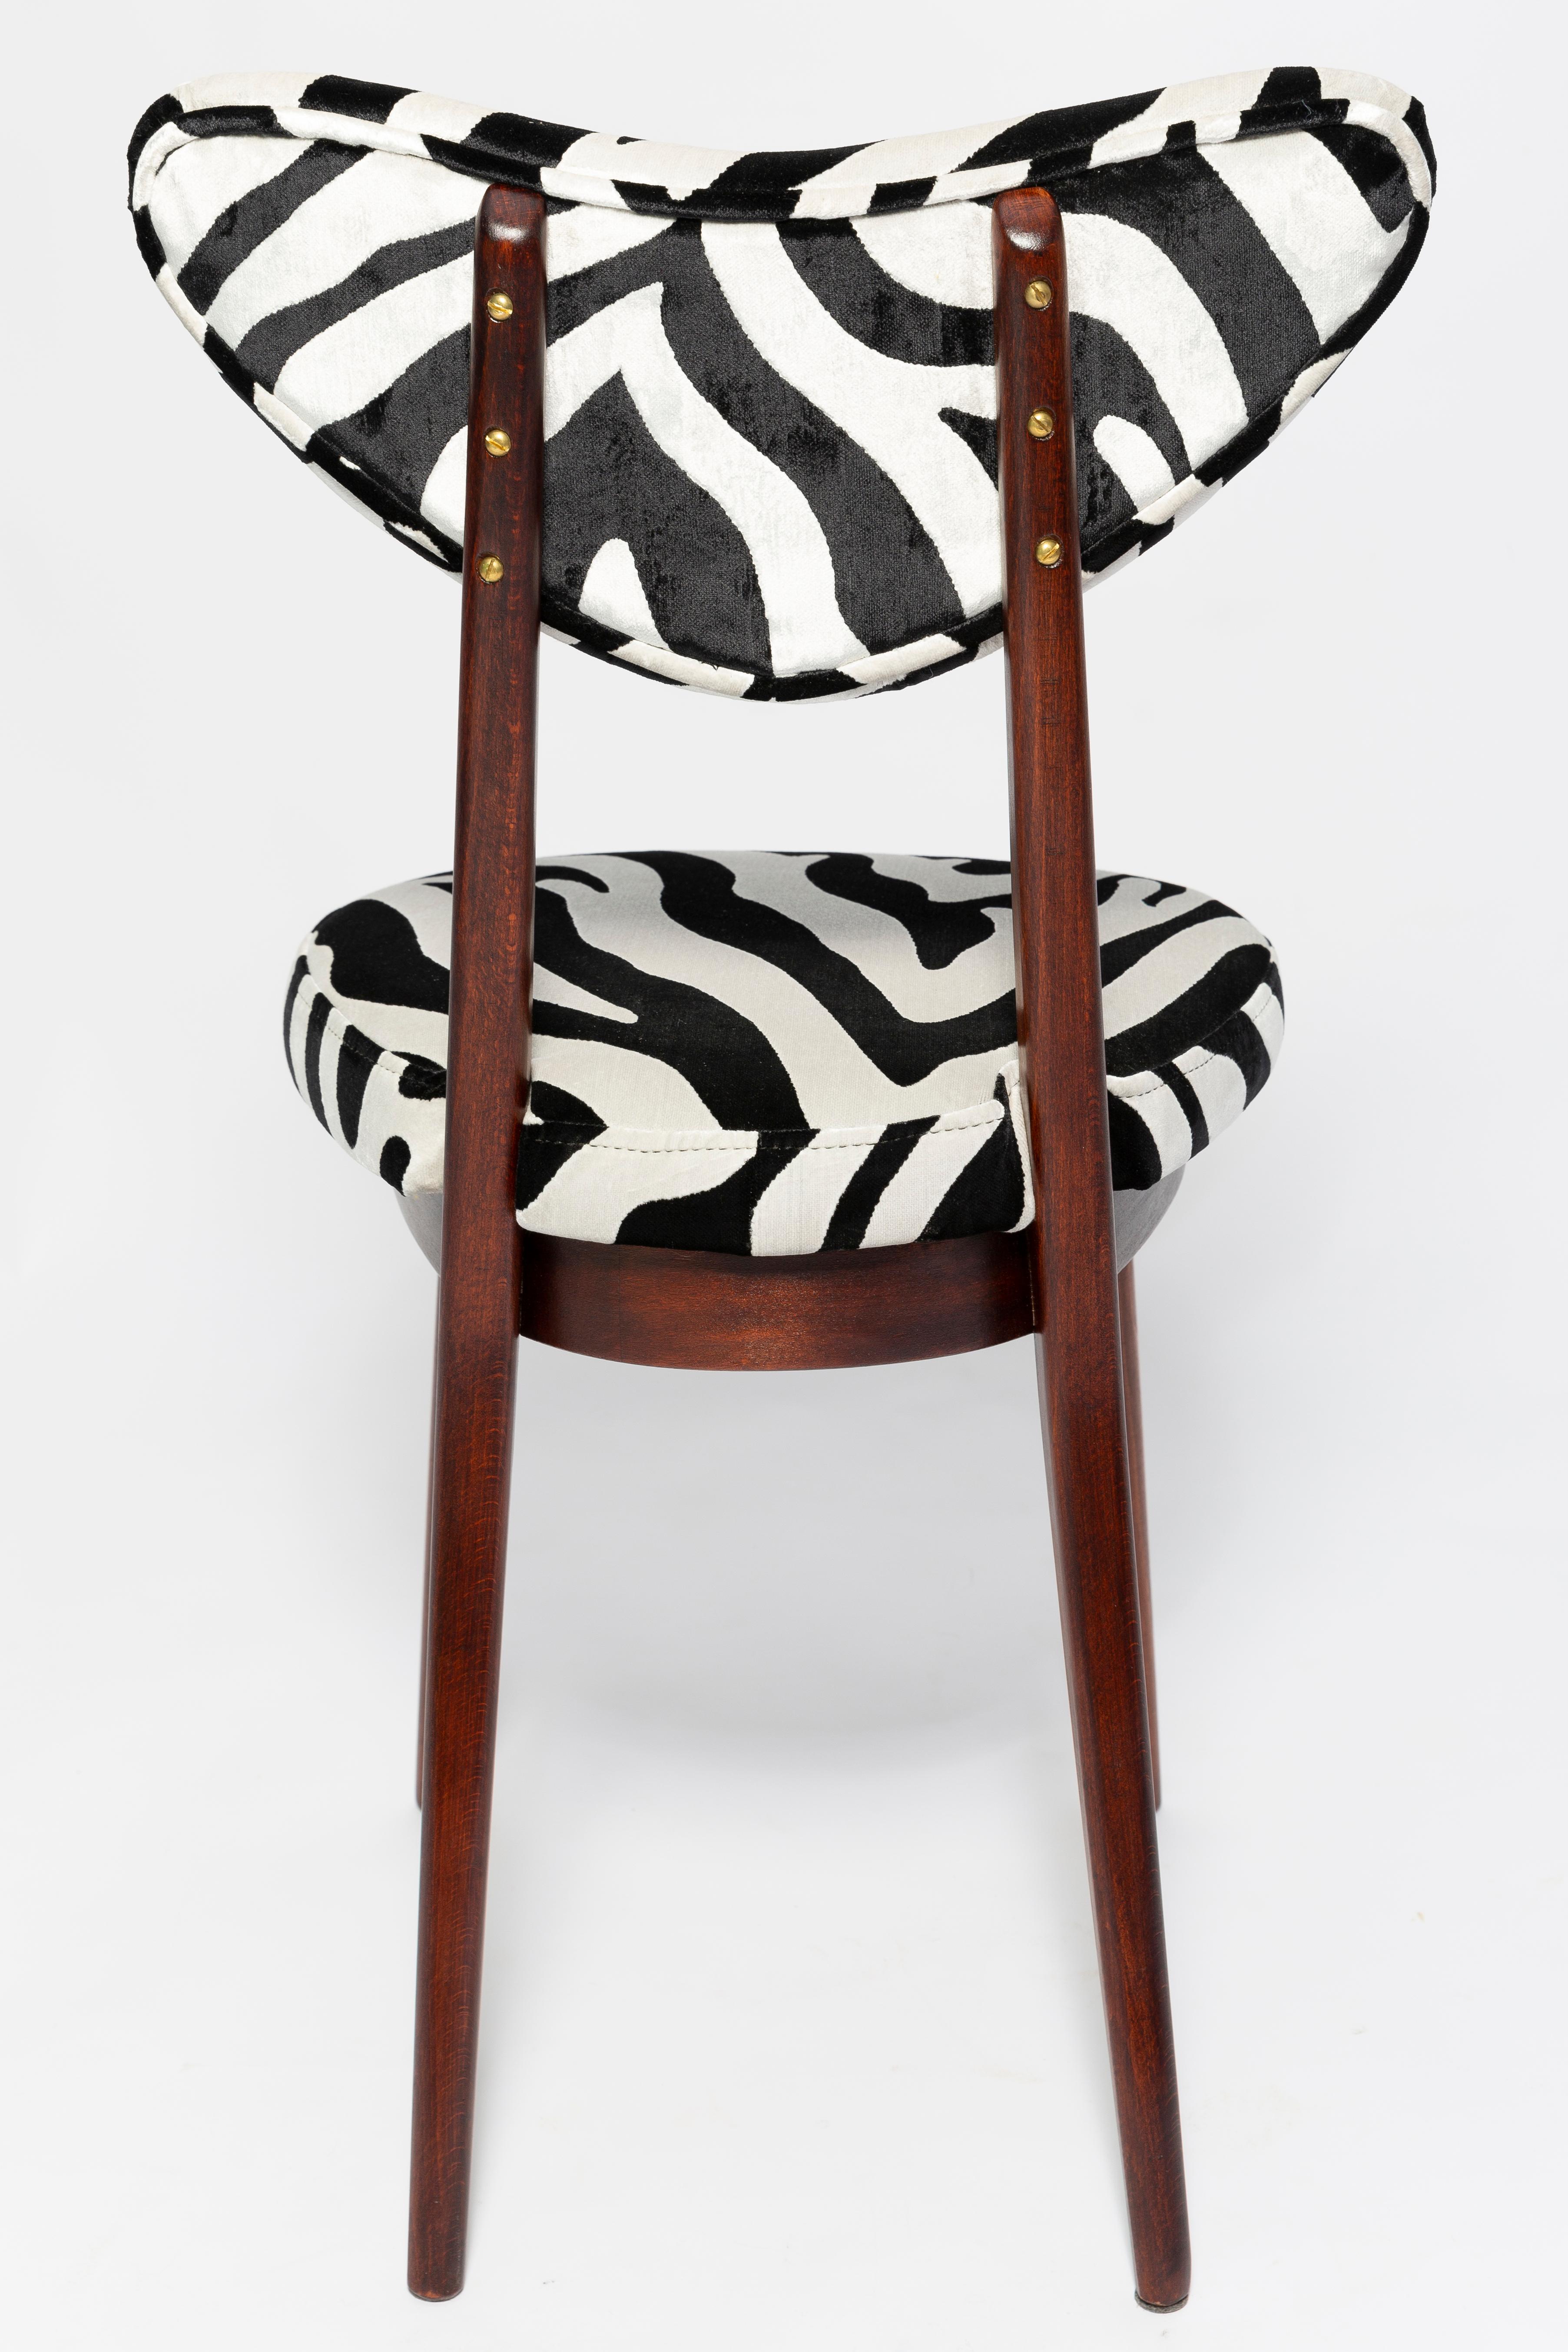 Set of Twelve Mid-Century Zebra Black and White Heart Chairs, Poland, 1960s For Sale 1